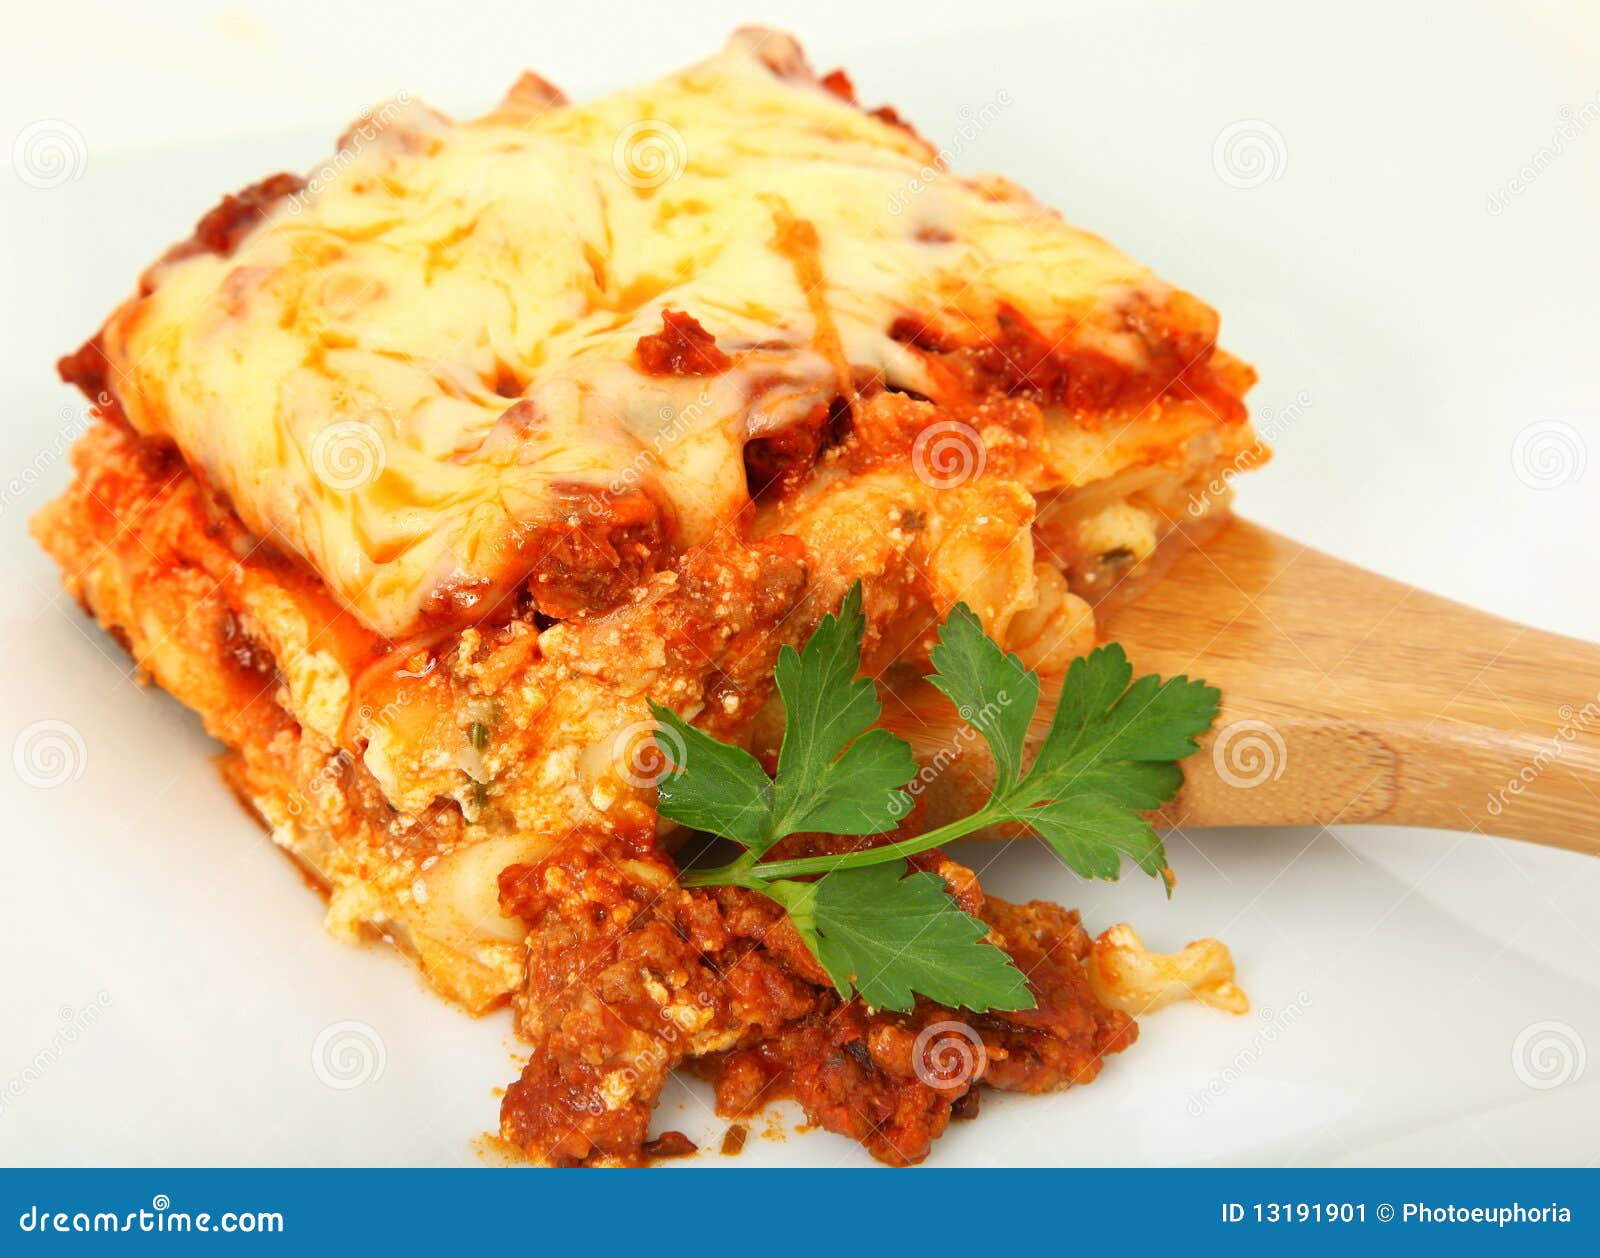 Lasagna Portion on Serving Spoon Stock Image - Image of dinner, italian ...